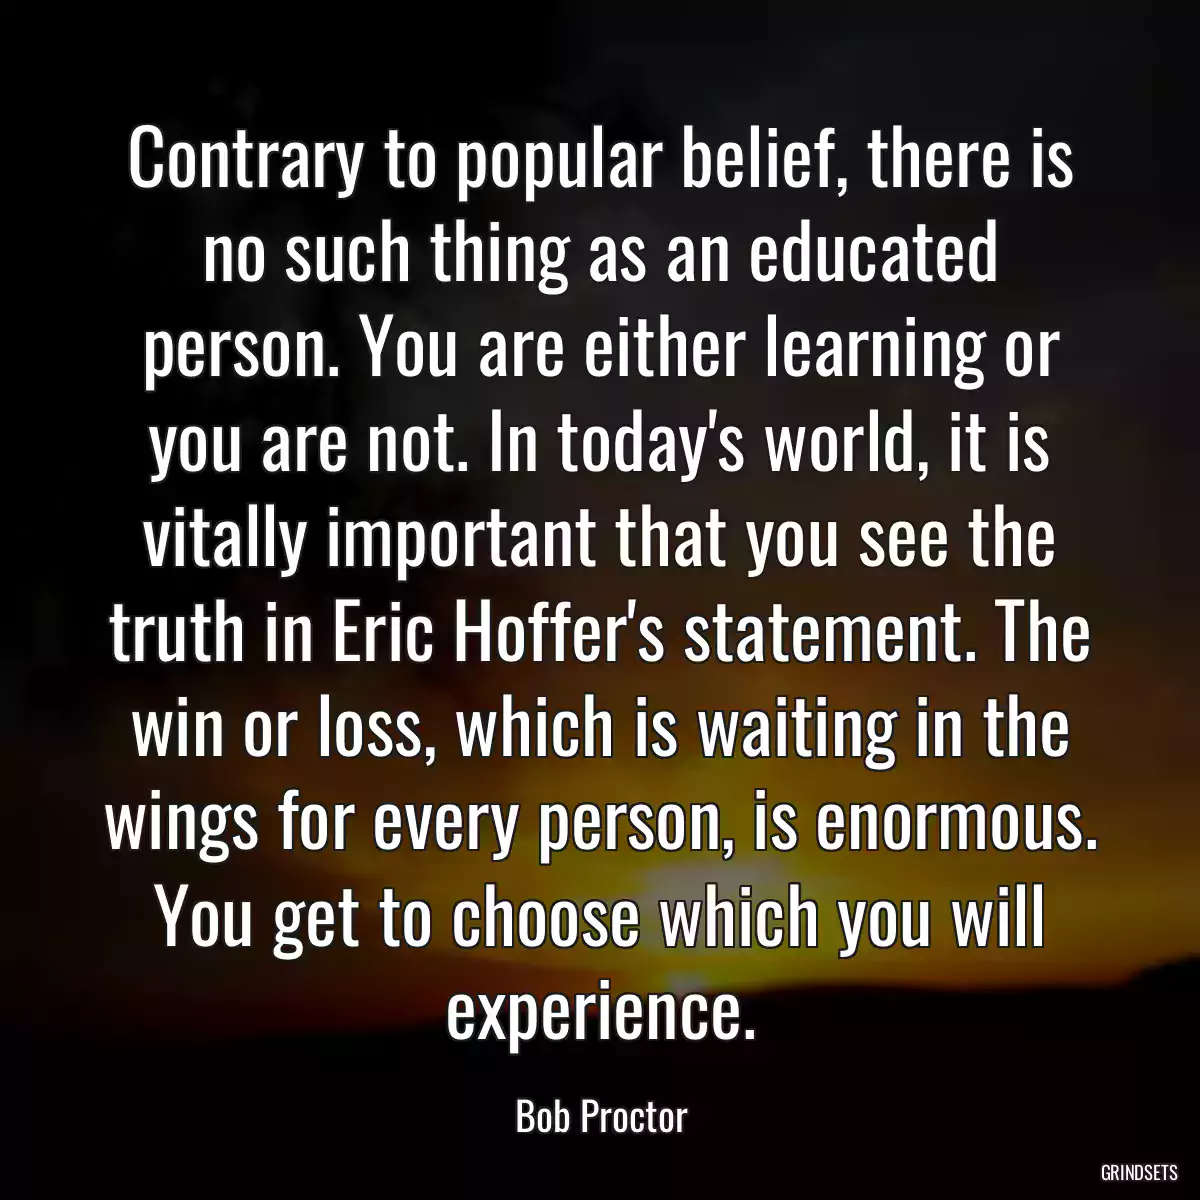 Contrary to popular belief, there is no such thing as an educated person. You are either learning or you are not. In today\'s world, it is vitally important that you see the truth in Eric Hoffer\'s statement. The win or loss, which is waiting in the wings for every person, is enormous. You get to choose which you will experience.